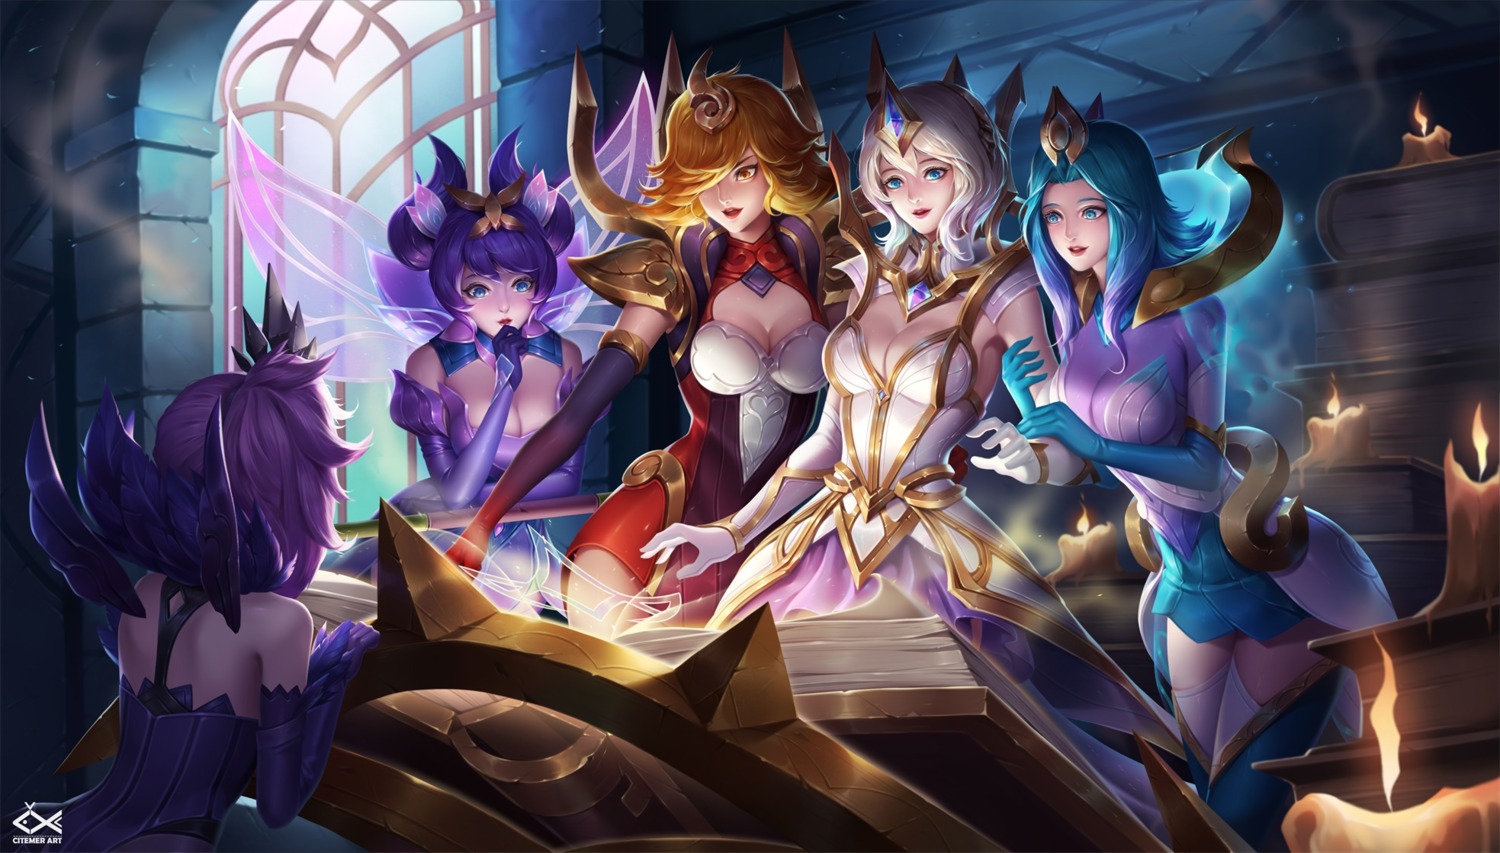 armor character_design citemer cleavage dress league_of_legends luxanna_crownguard thighhighs wings